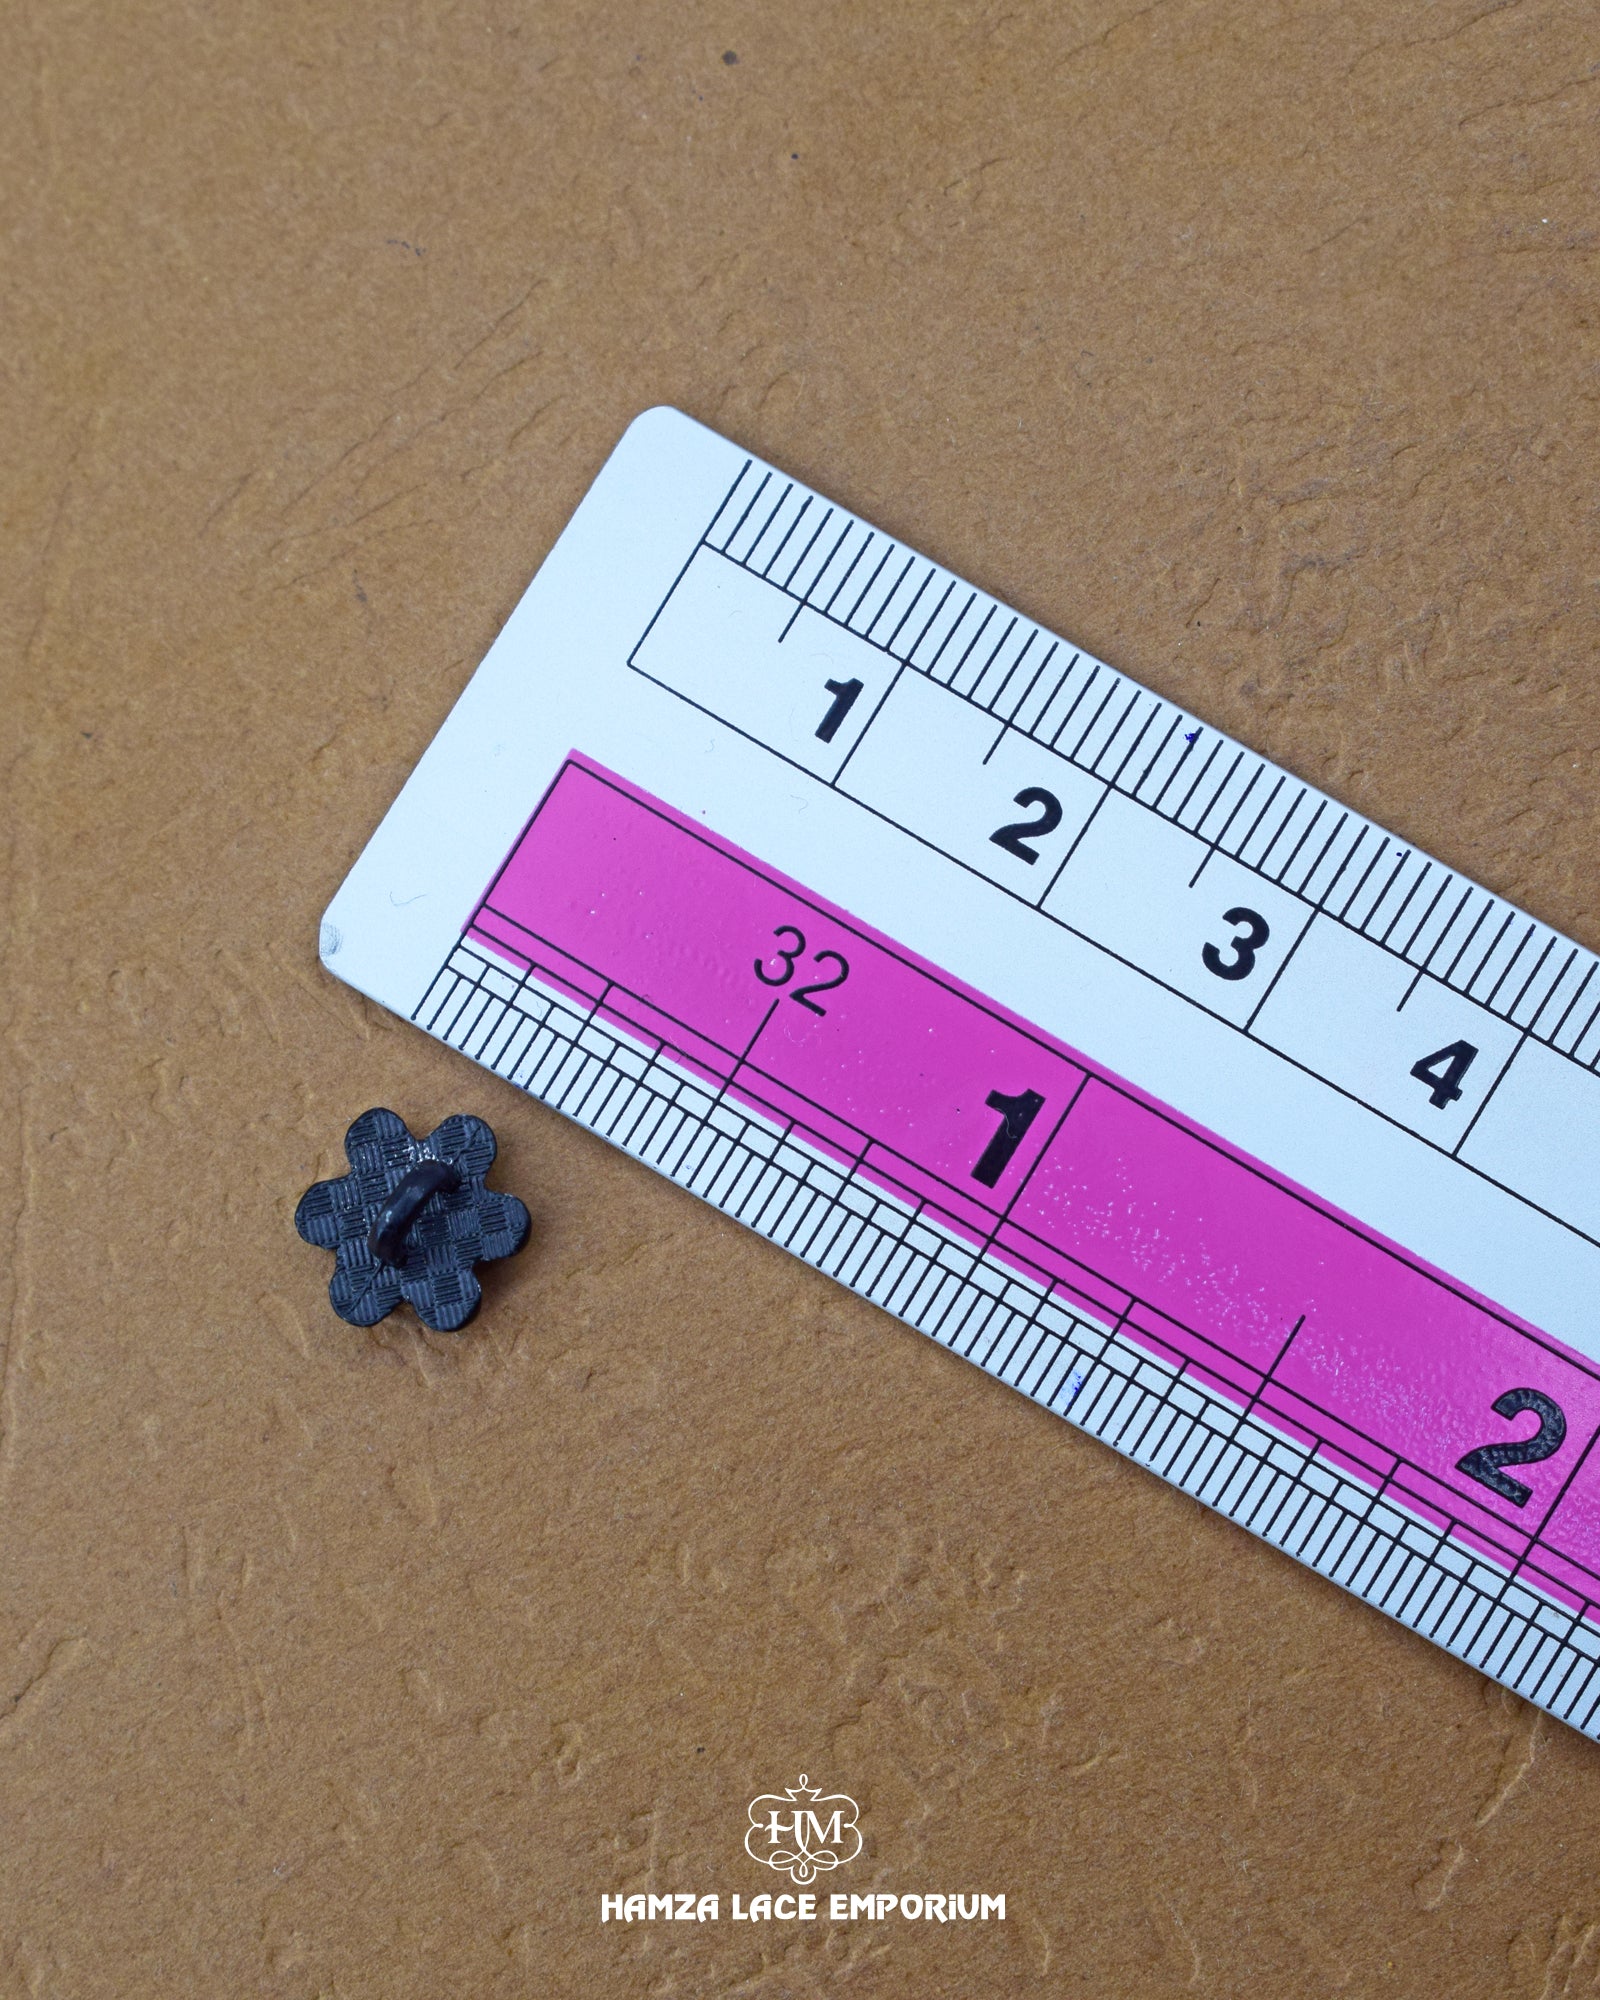 The size of the 'Flower Design Plastic Button MB641' is measured using a ruler.